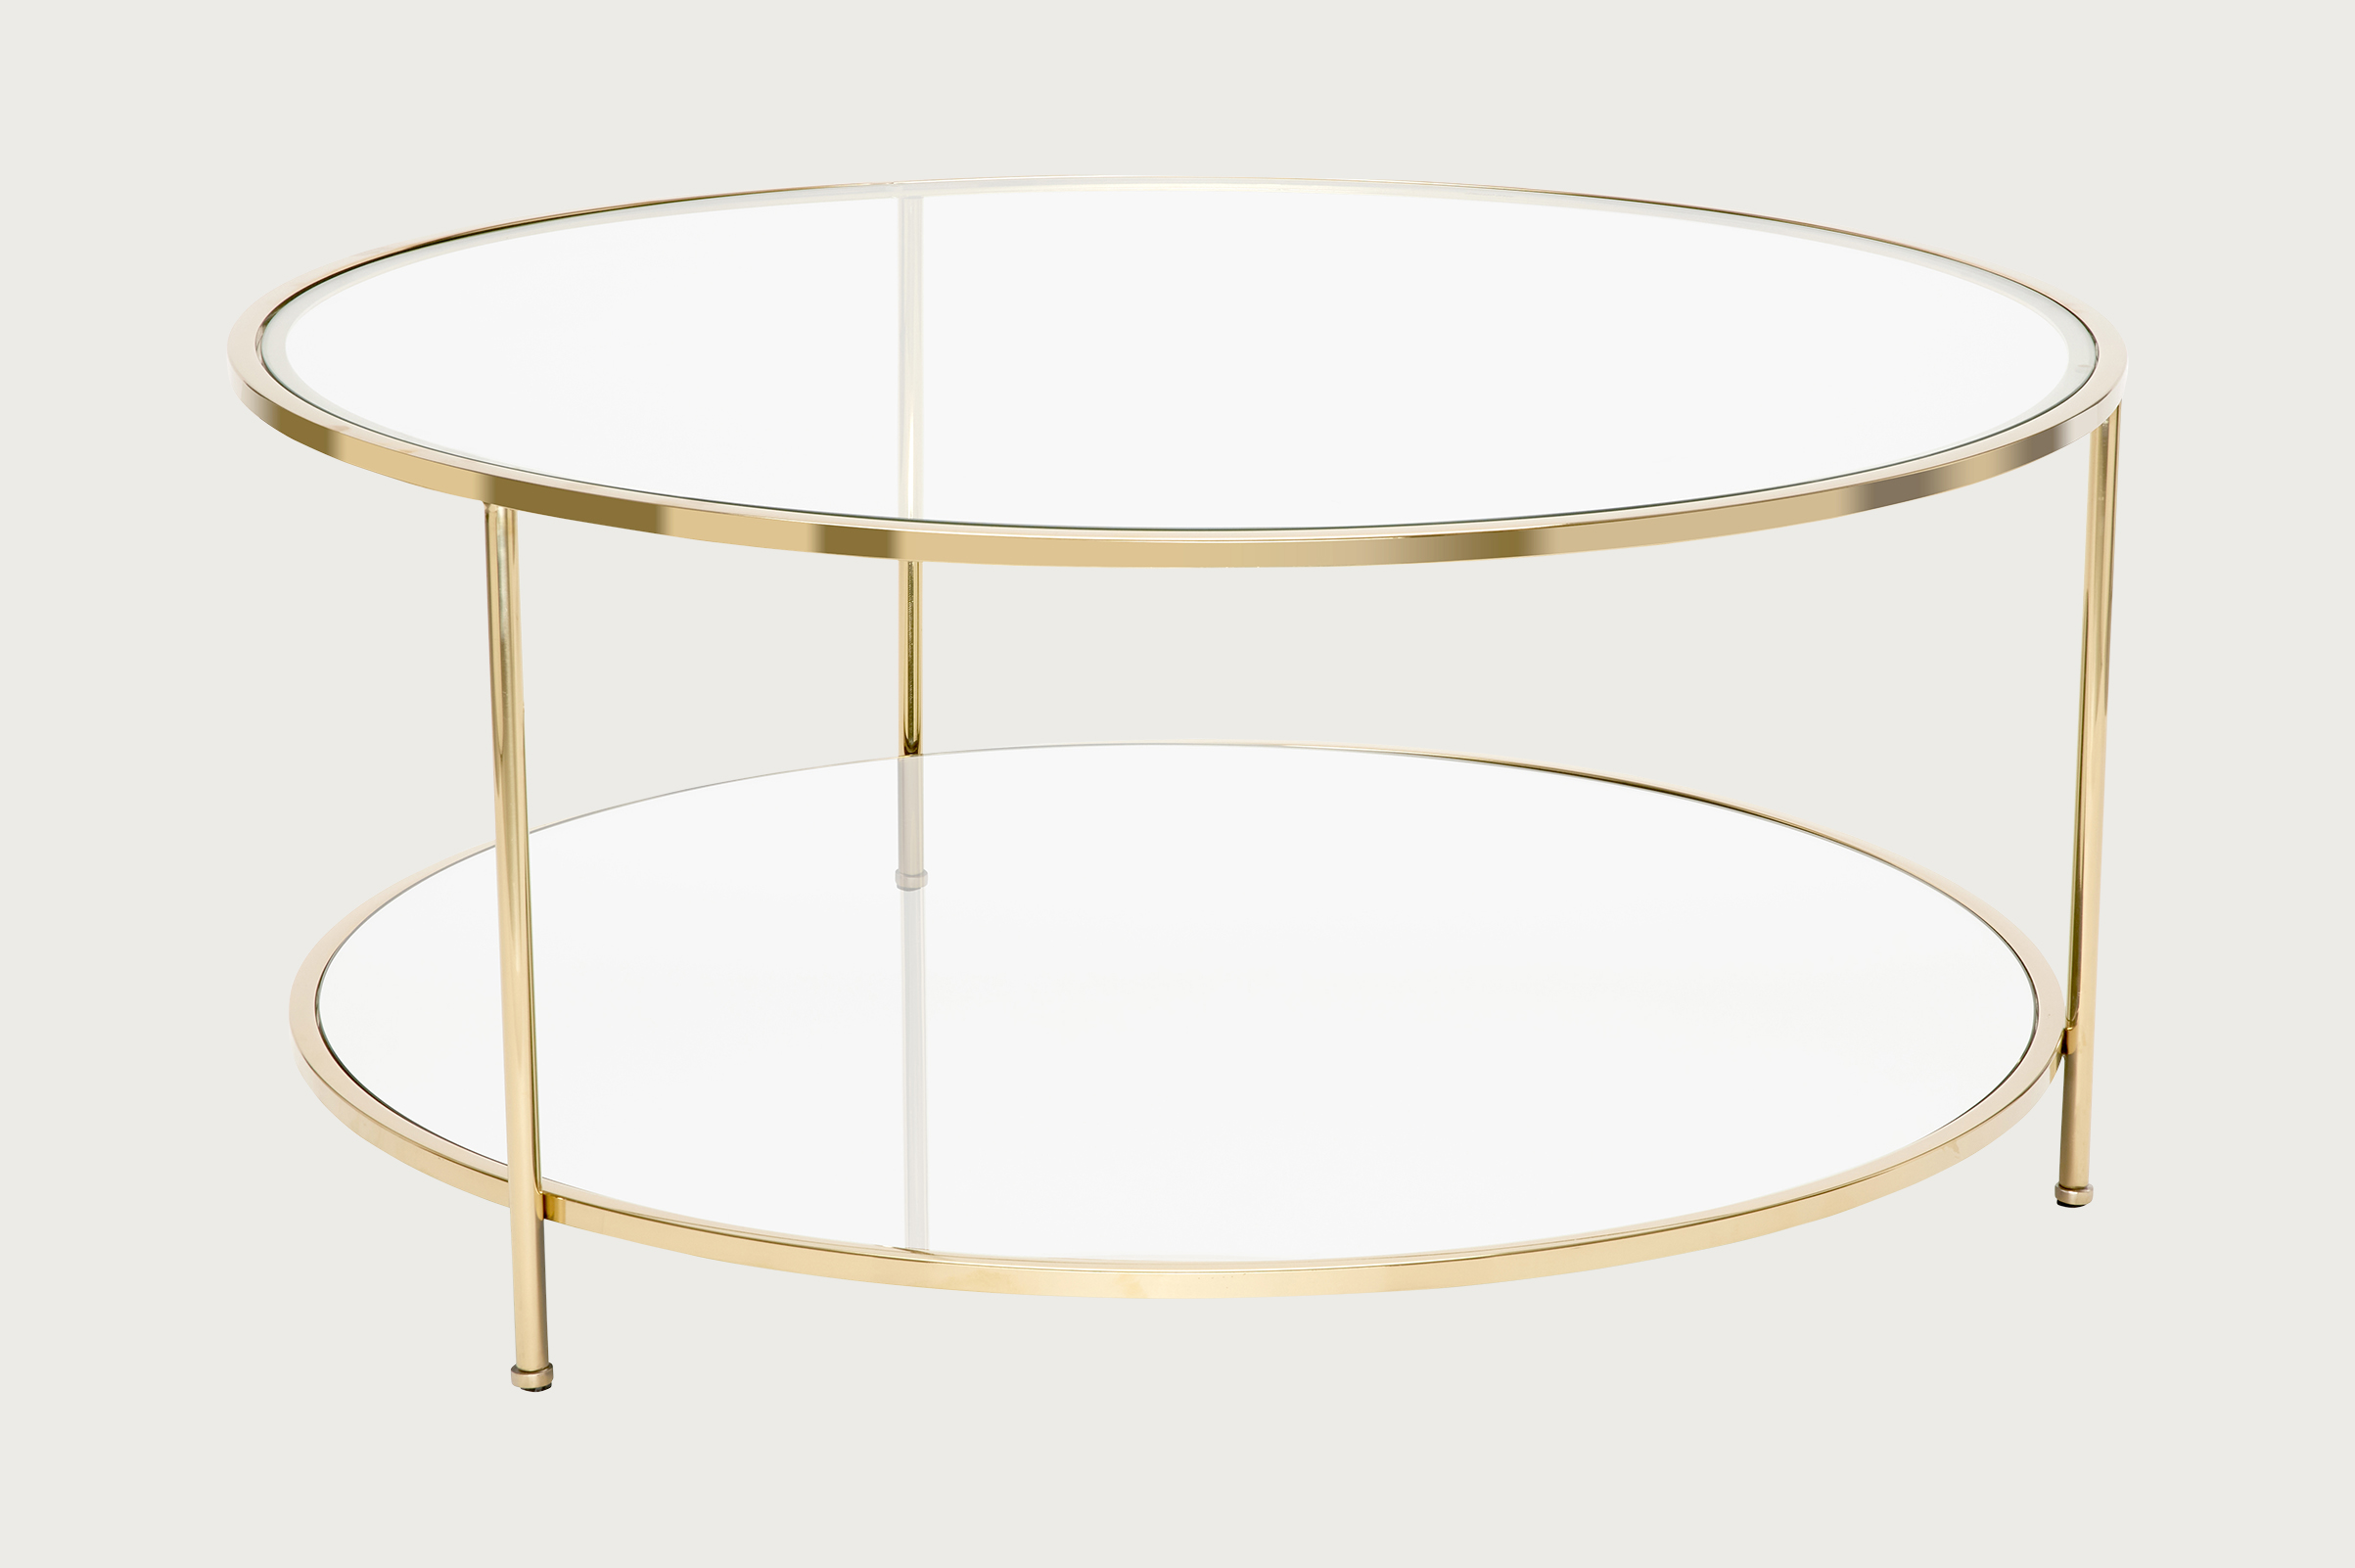 Sphere Coffee Table – Polished Brass